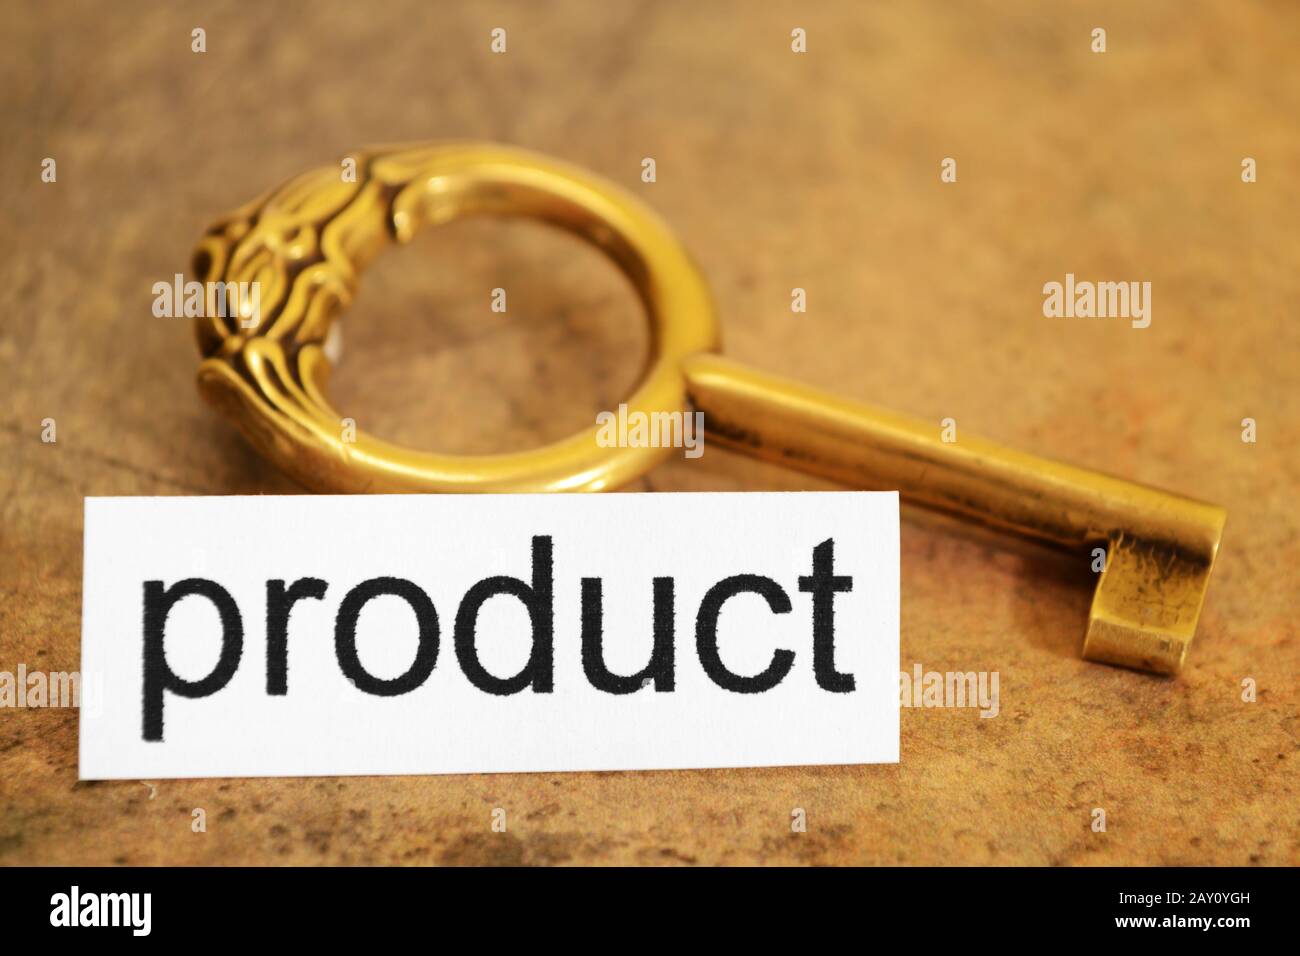 Product concept Stock Photo